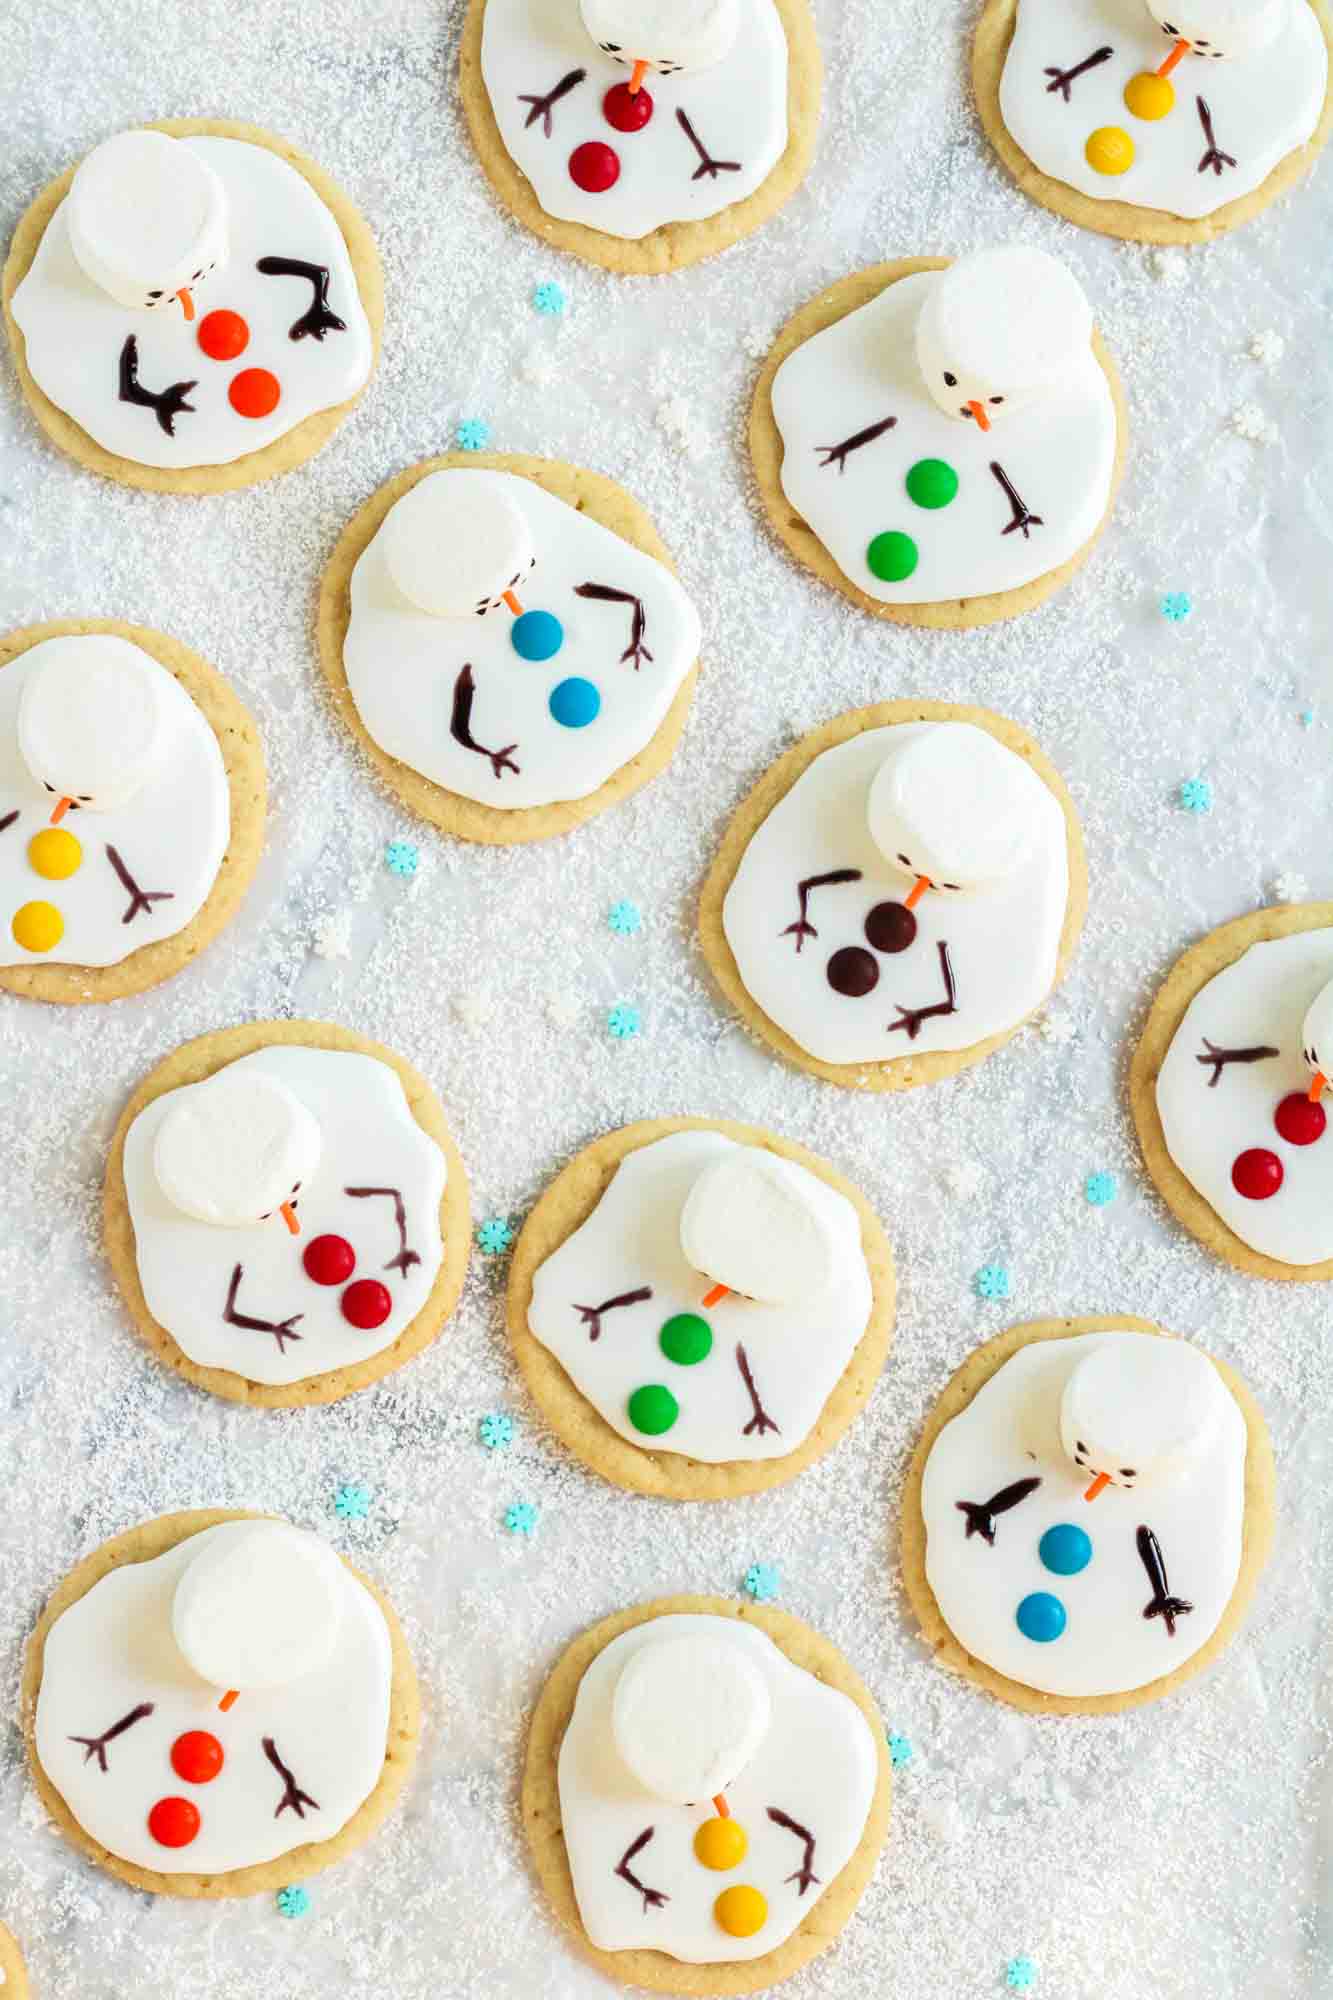 a group of melted snowman cookies on a tray of sugar and sprinkles meant to look like a snowy field.